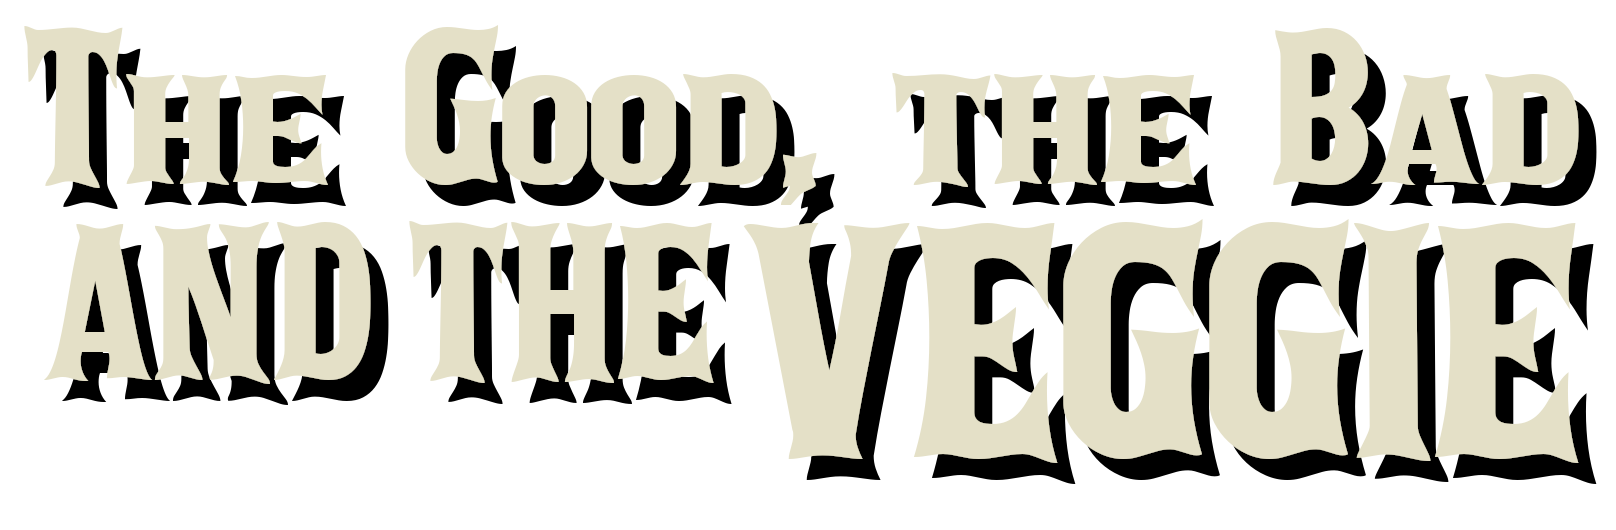 The Good, the Bad, and the Veggie